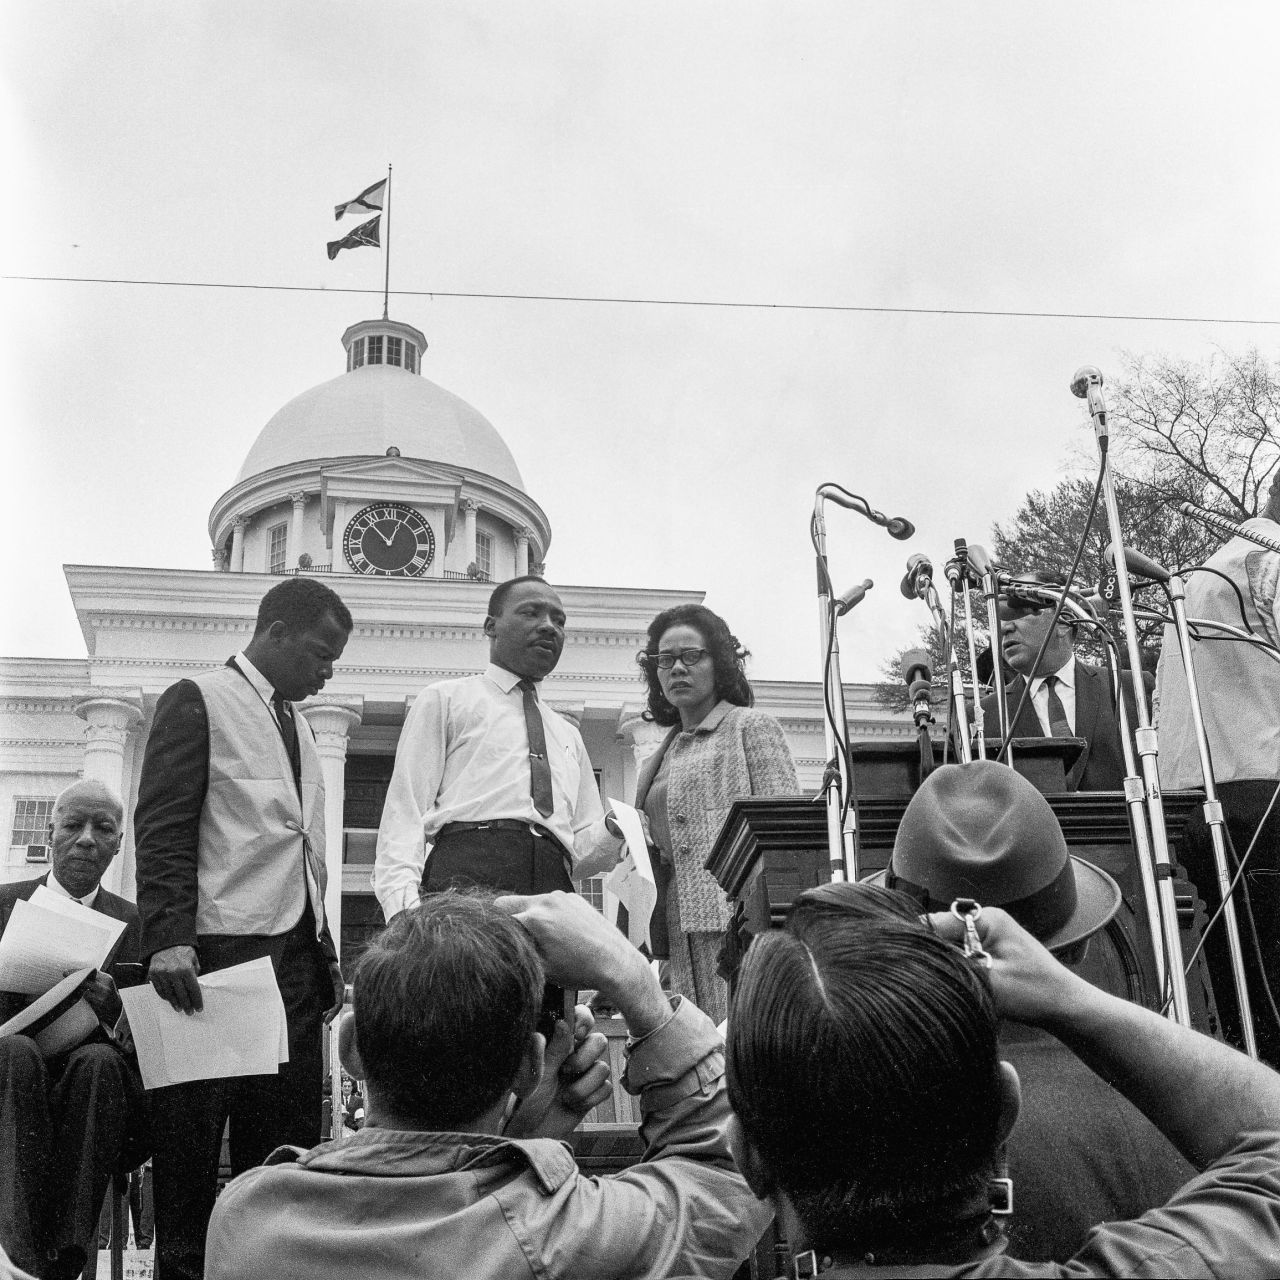 Lewis, in the vest, joins King and King's wife, Coretta Scott King, before a rally on the steps on the Alabama Capitol on March 25, 1965. A few months later, President Lyndon B. Johnson signed the Voting Rights Act, which ensured that everyone's right to vote would be protected and enforced.